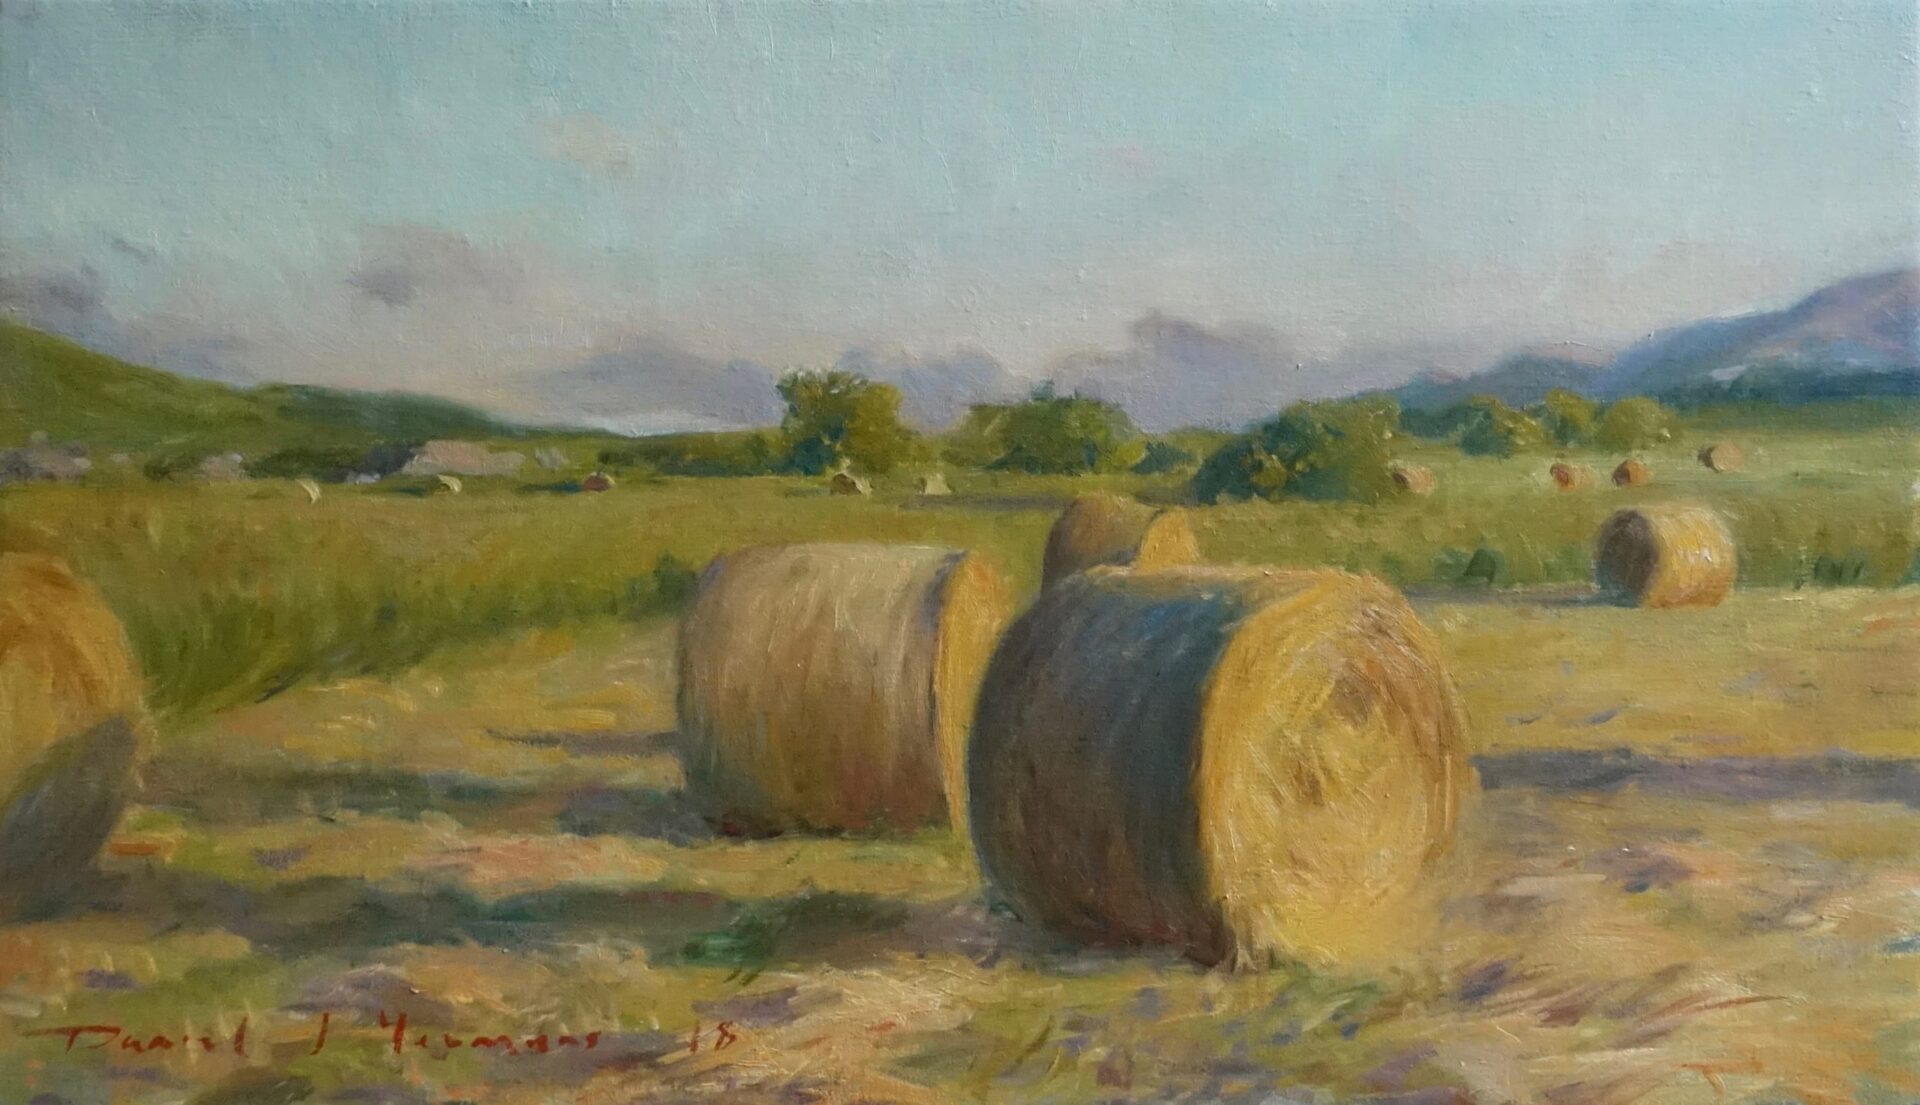 Oil painting of Haybales by sunset at the foot of Snowdon